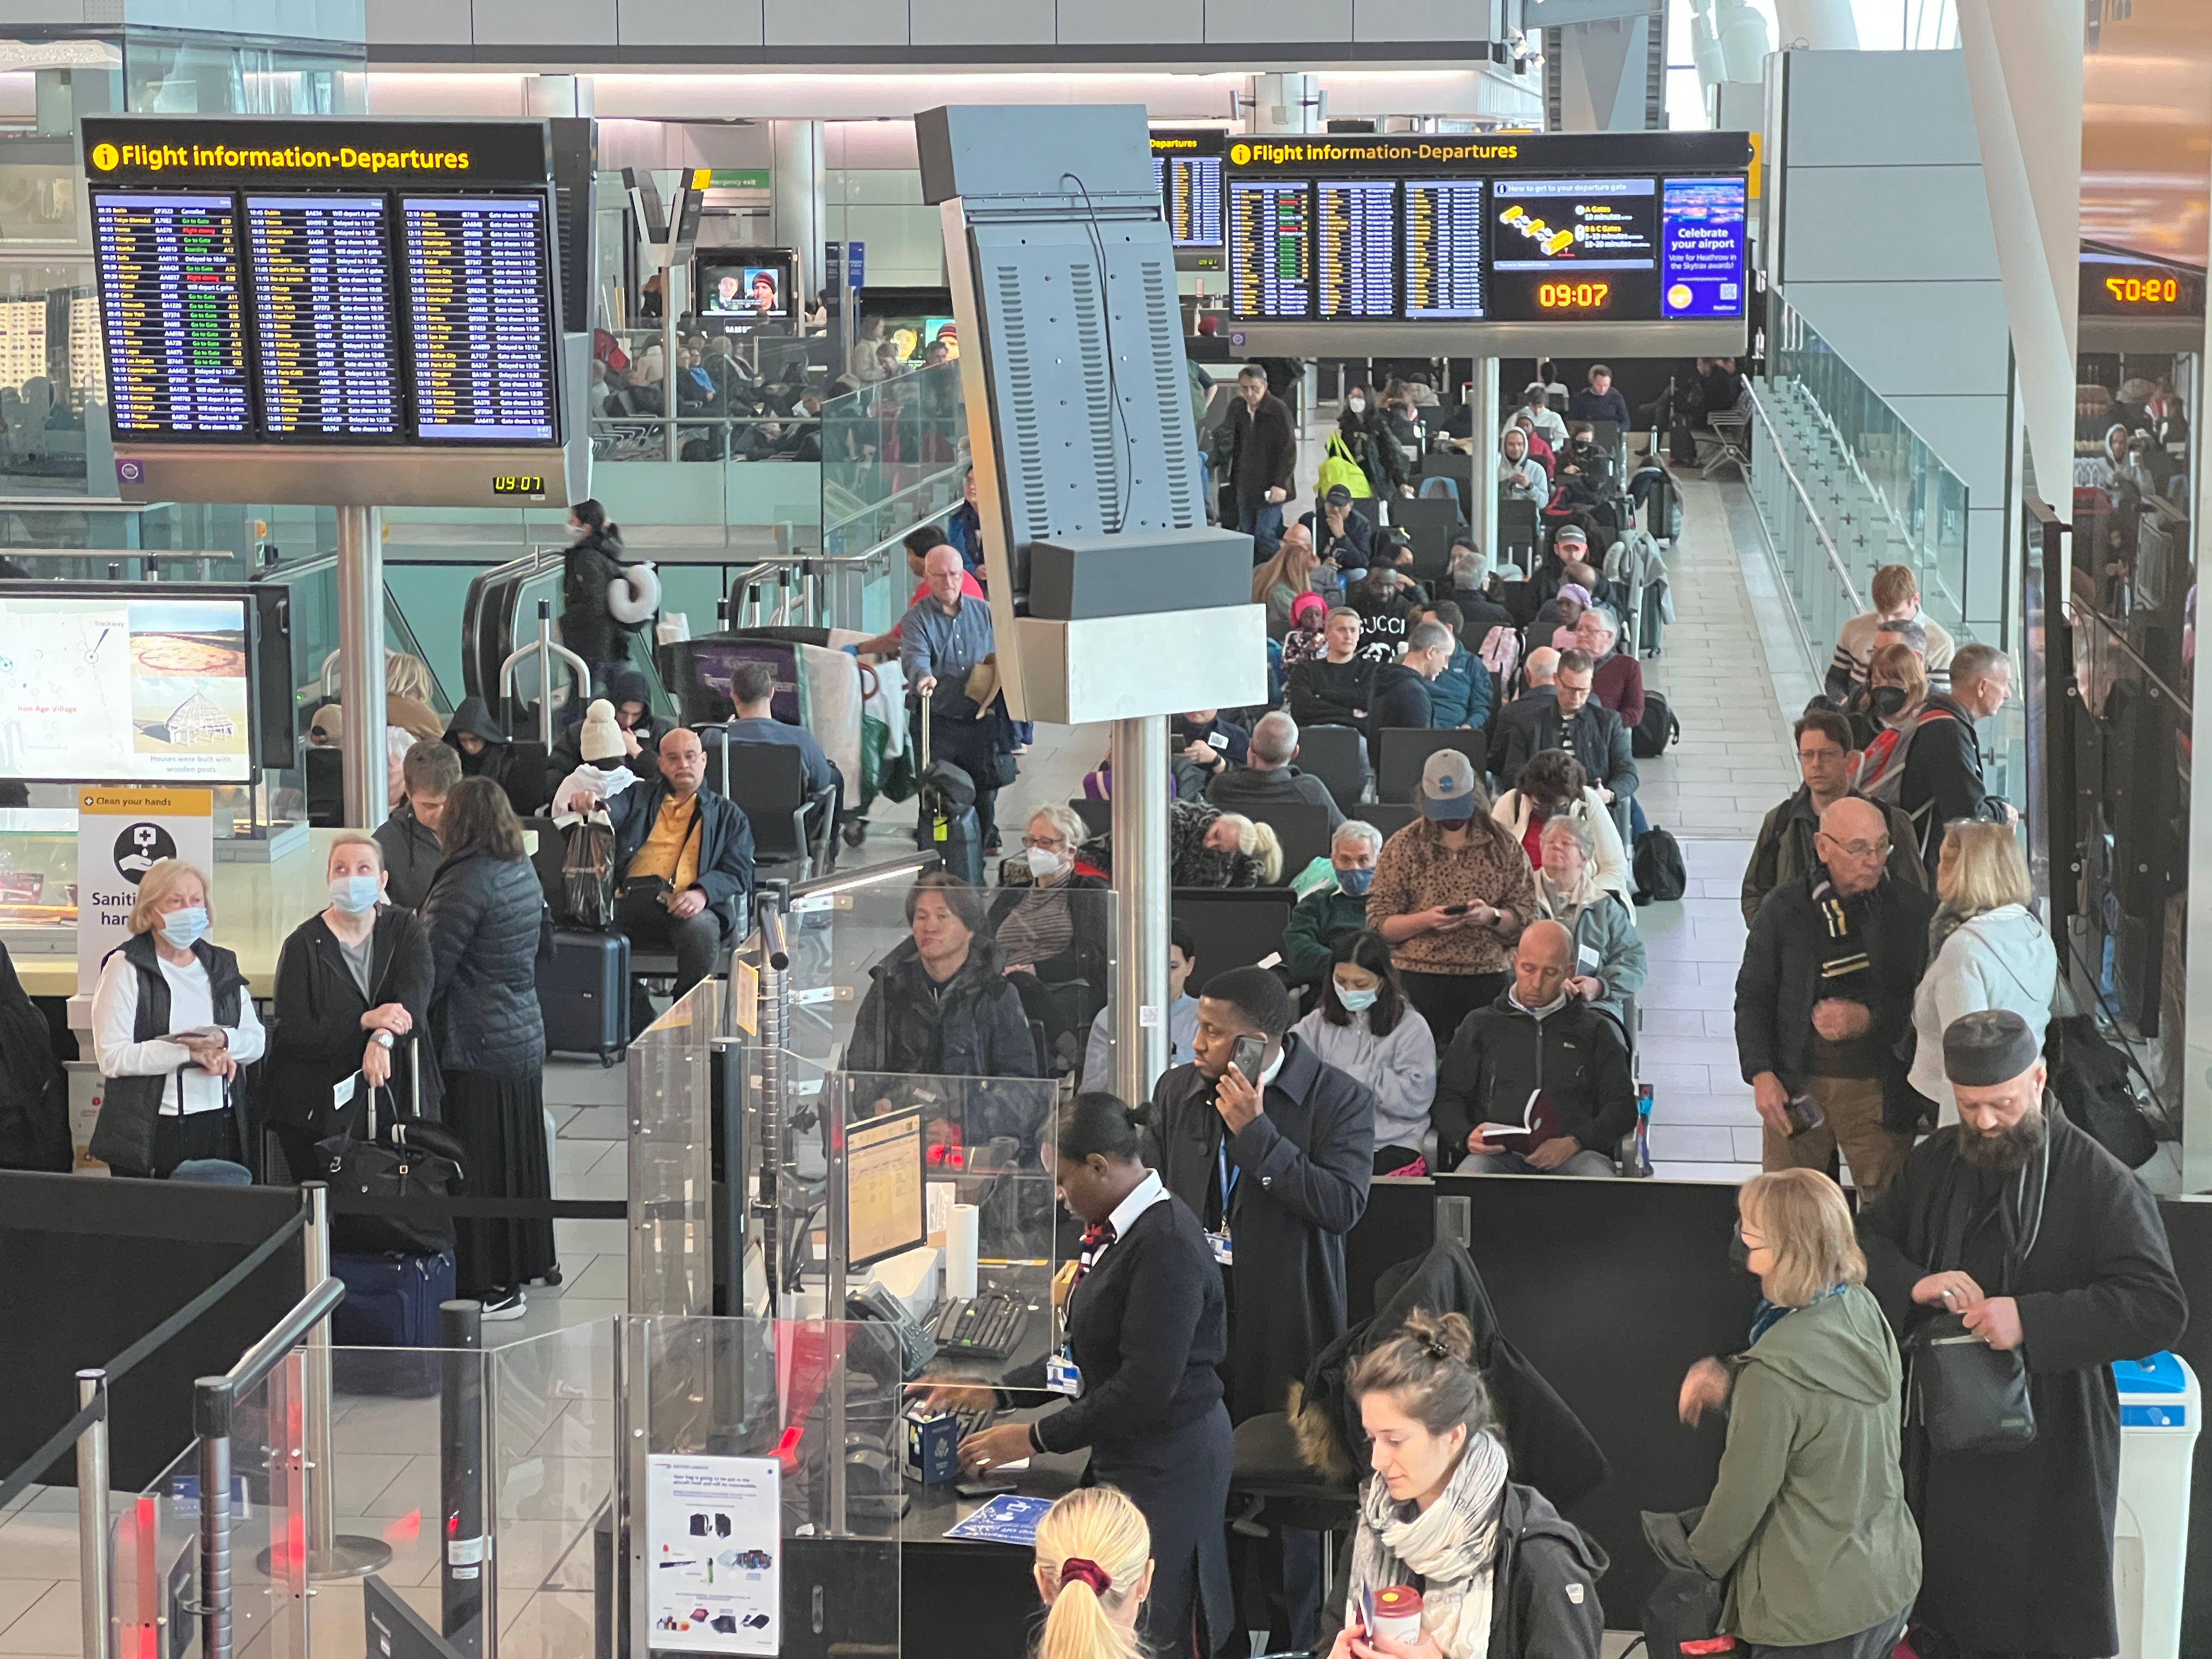 Going places: Passengers at Heathrow airport Terminal 5 in February 2023